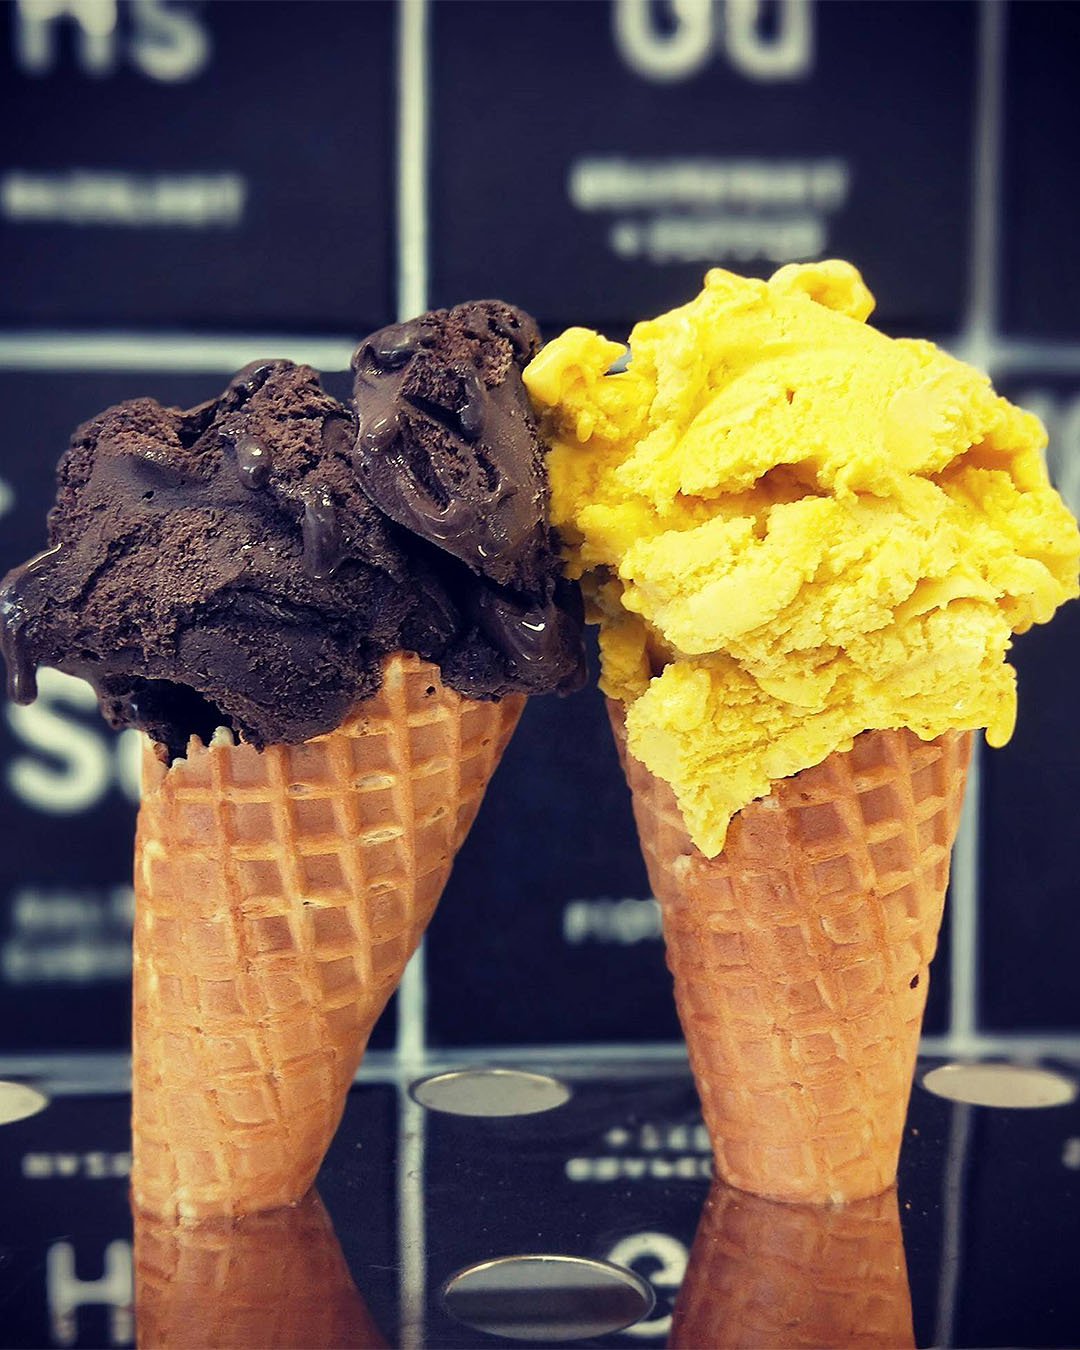 Two lovely looking cones waiting to be devoured at The Gelato Lab, one of the best places to get ice cream in Christchurch.